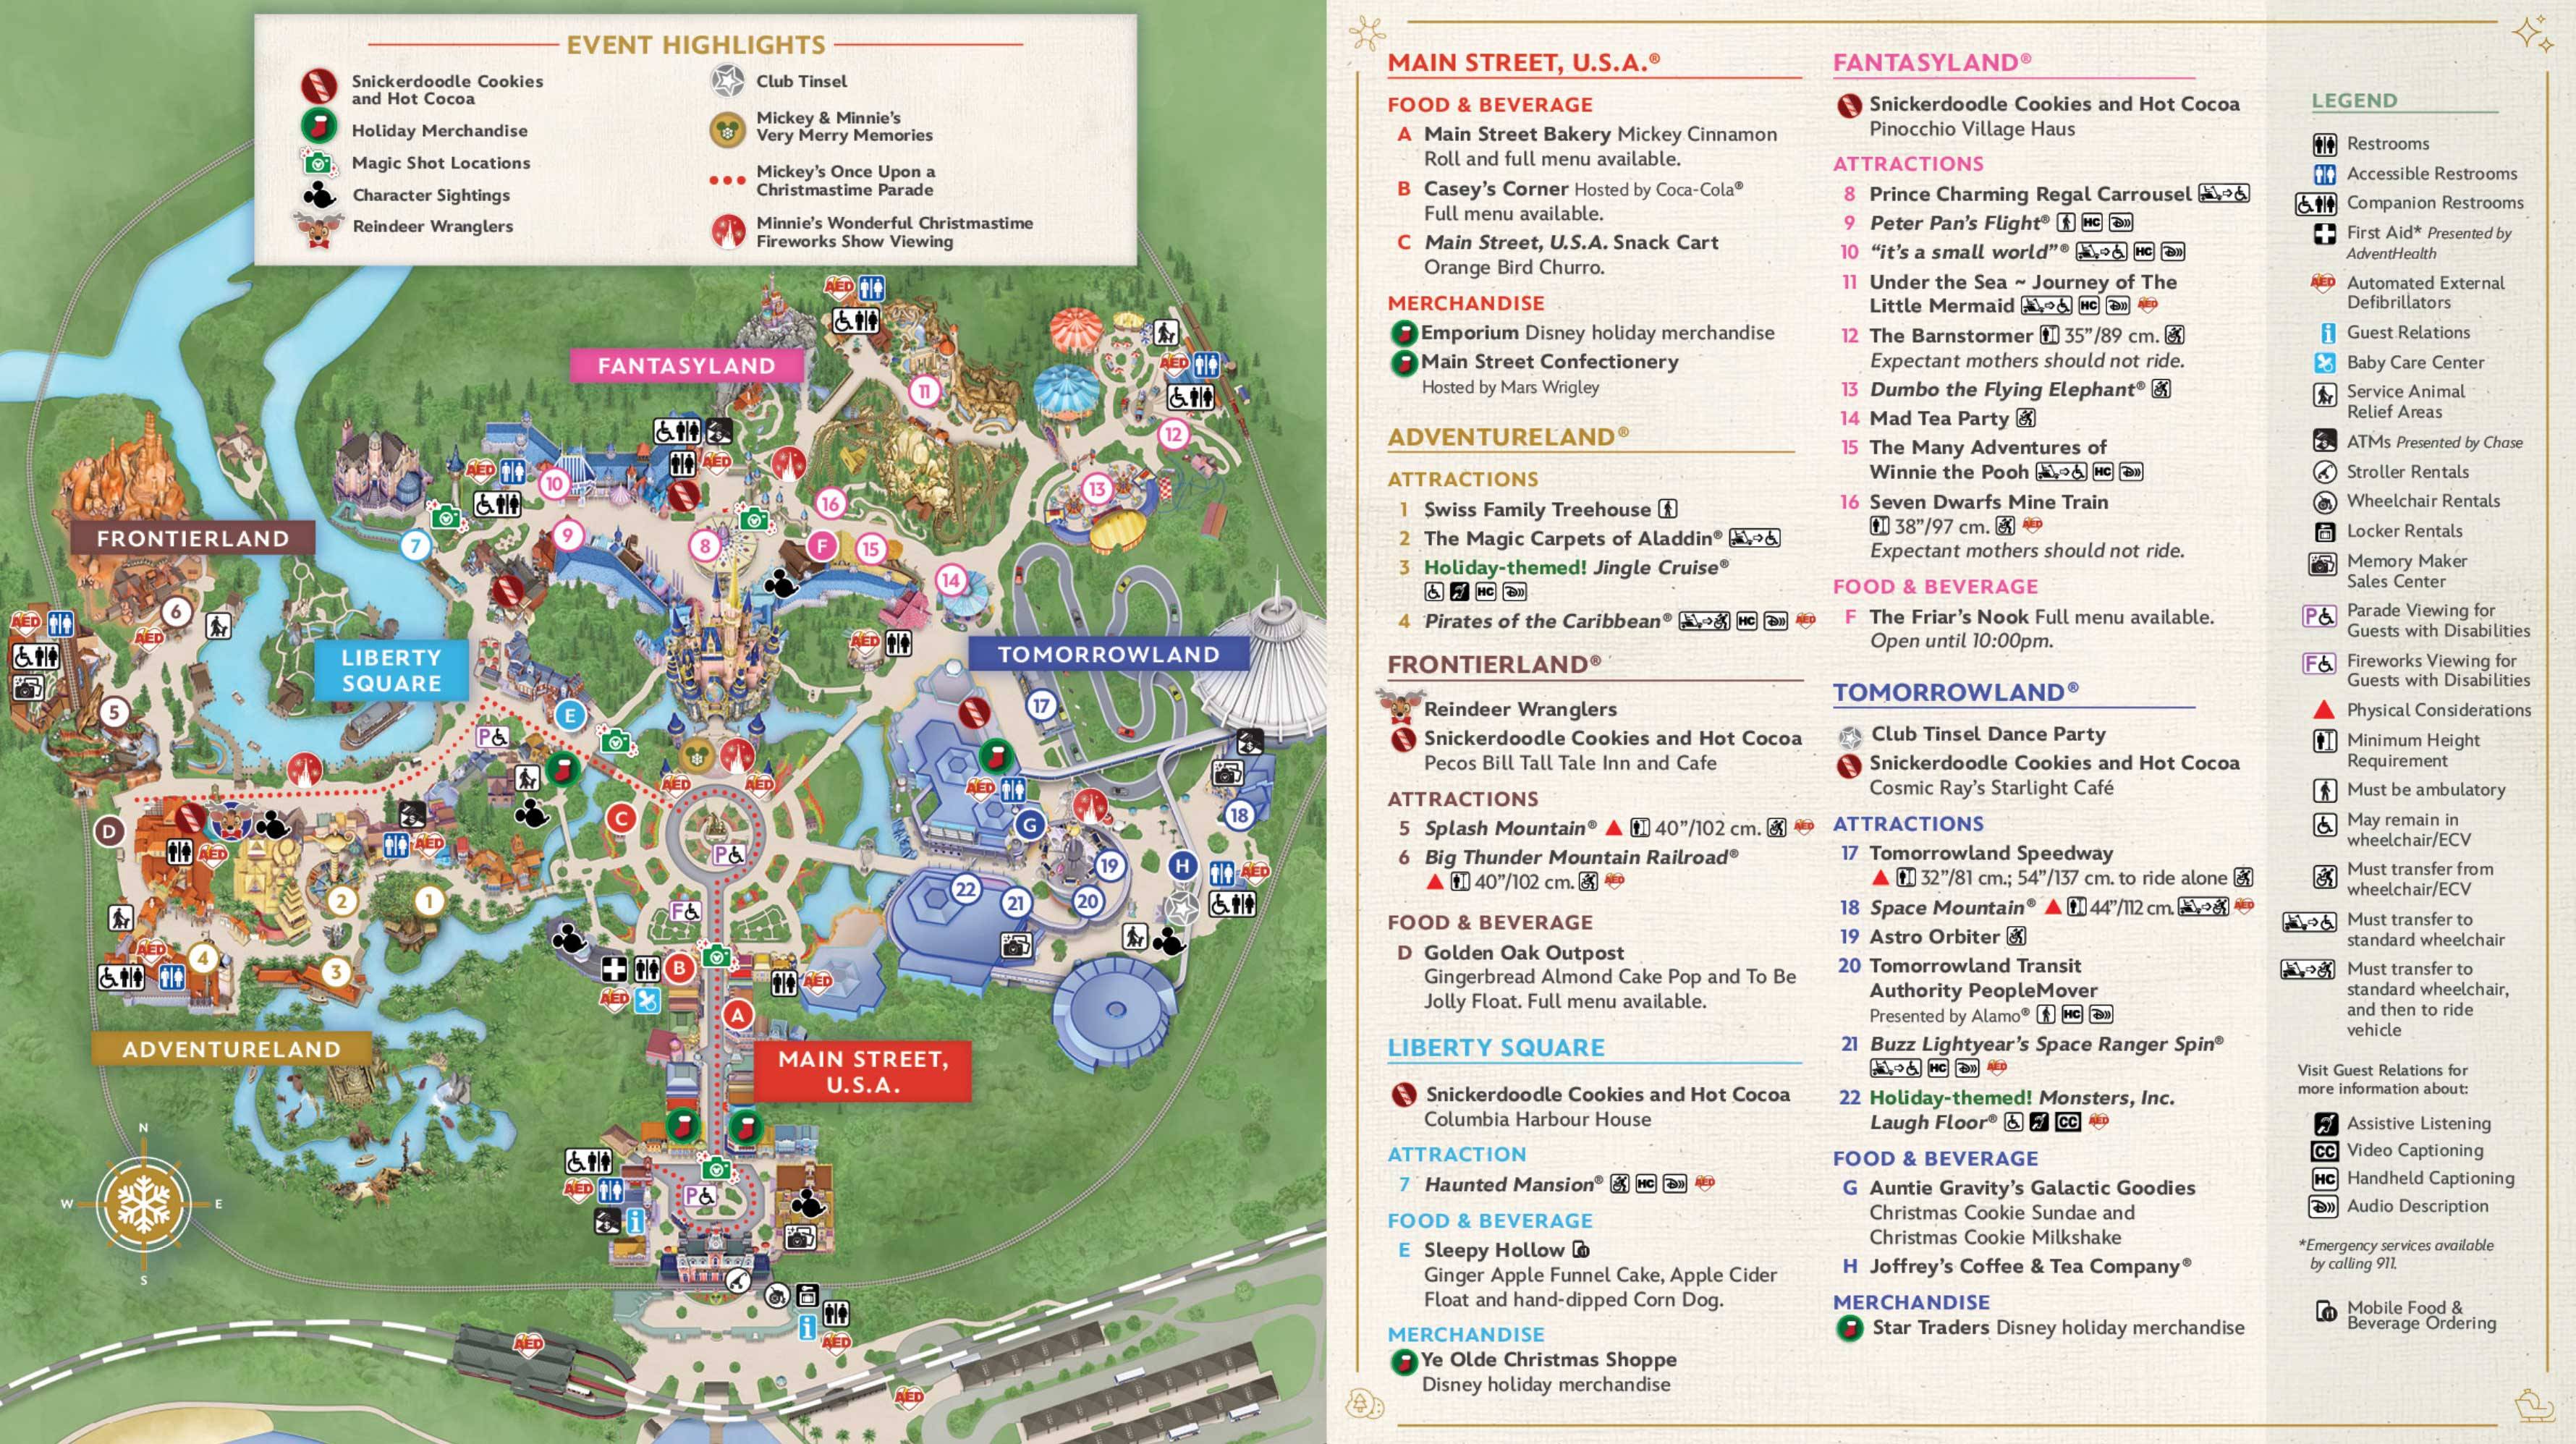 Disney Very Merriest After Hours guide map November 2021